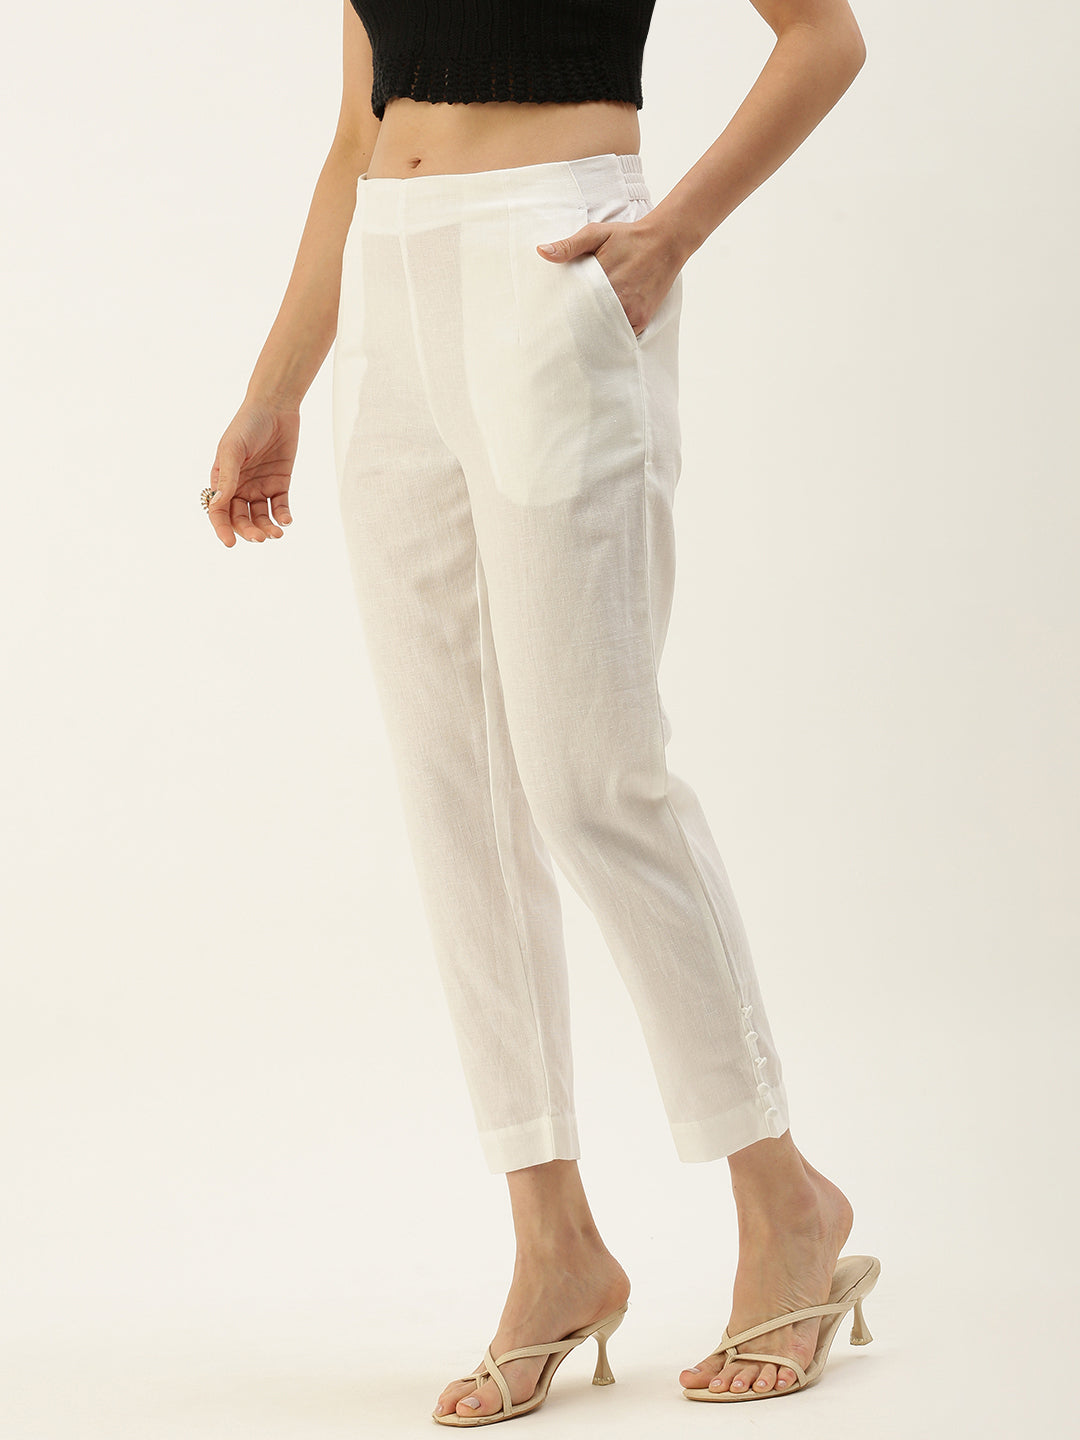 Missguided  Tailored Cigarette Trousers  White  Missguided